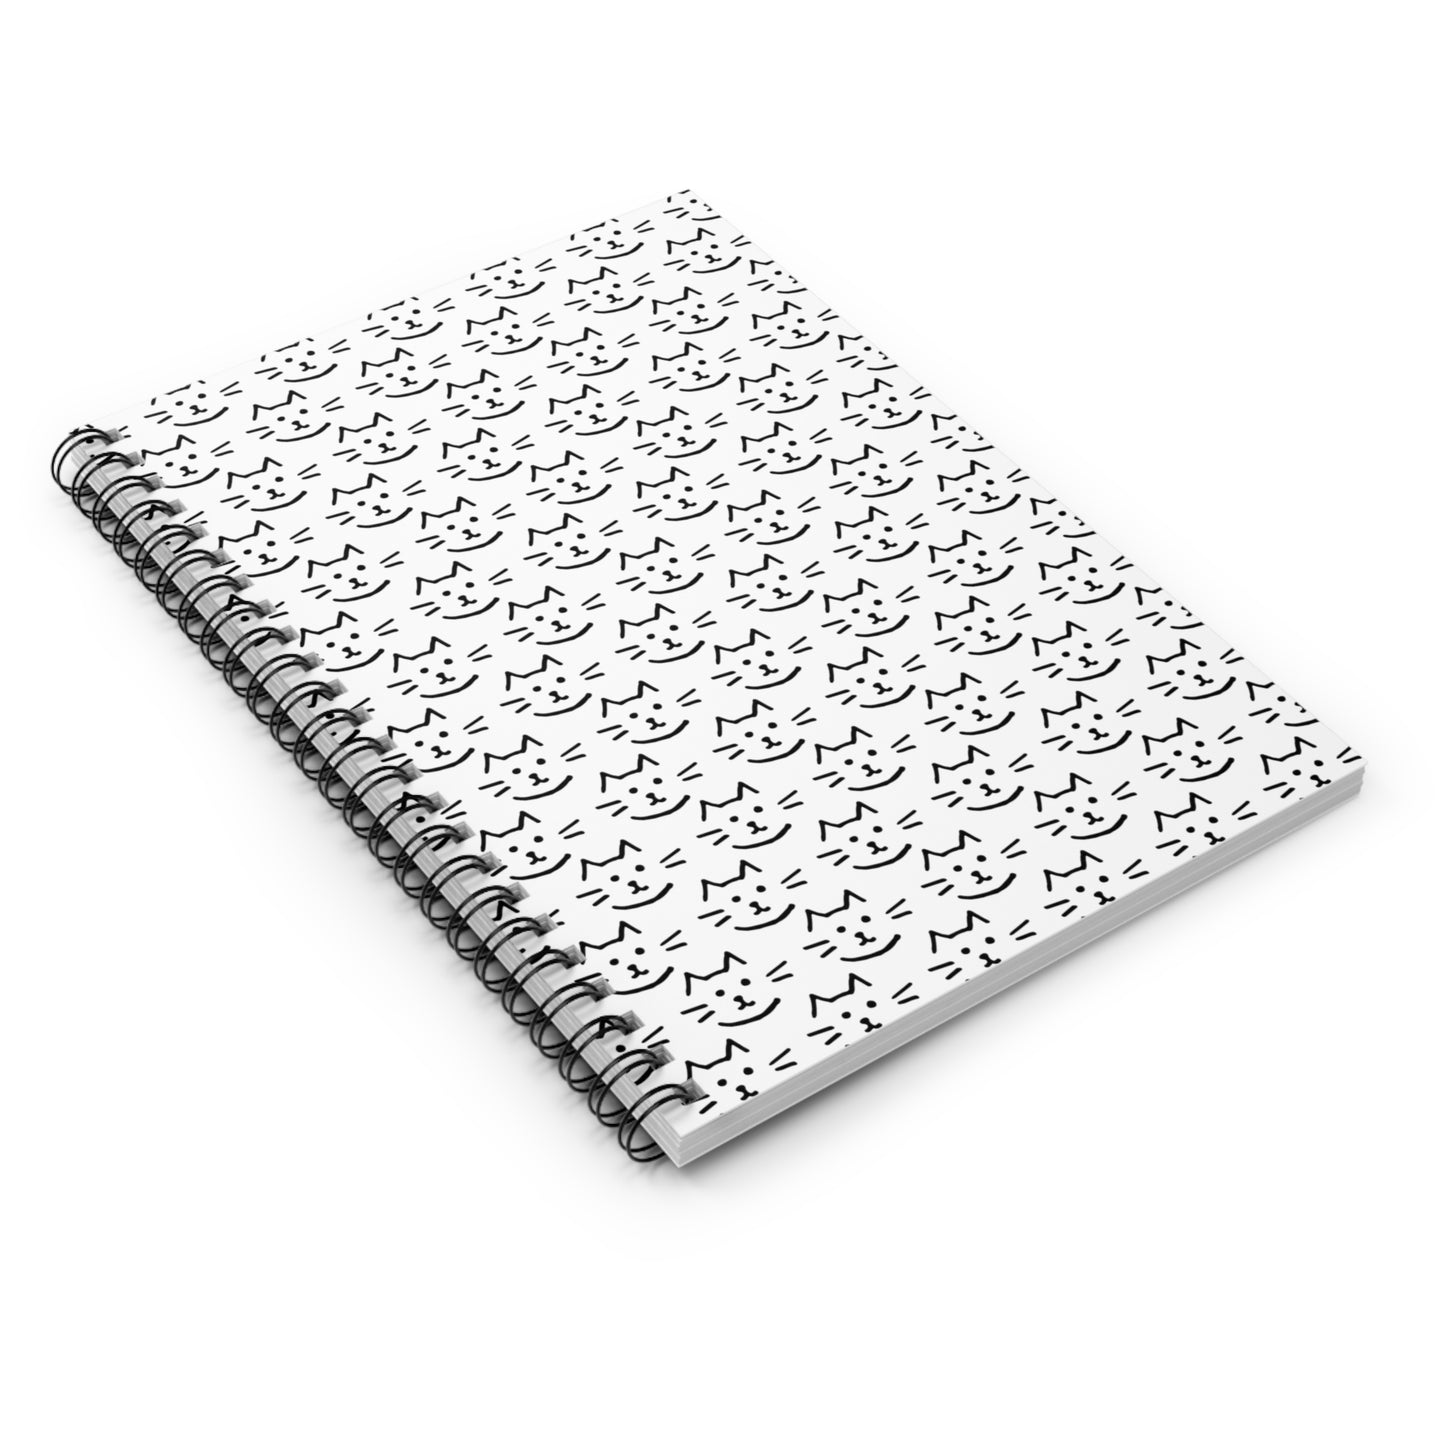 Doodle Kitty Face Spiral Notebook - Ruled Line